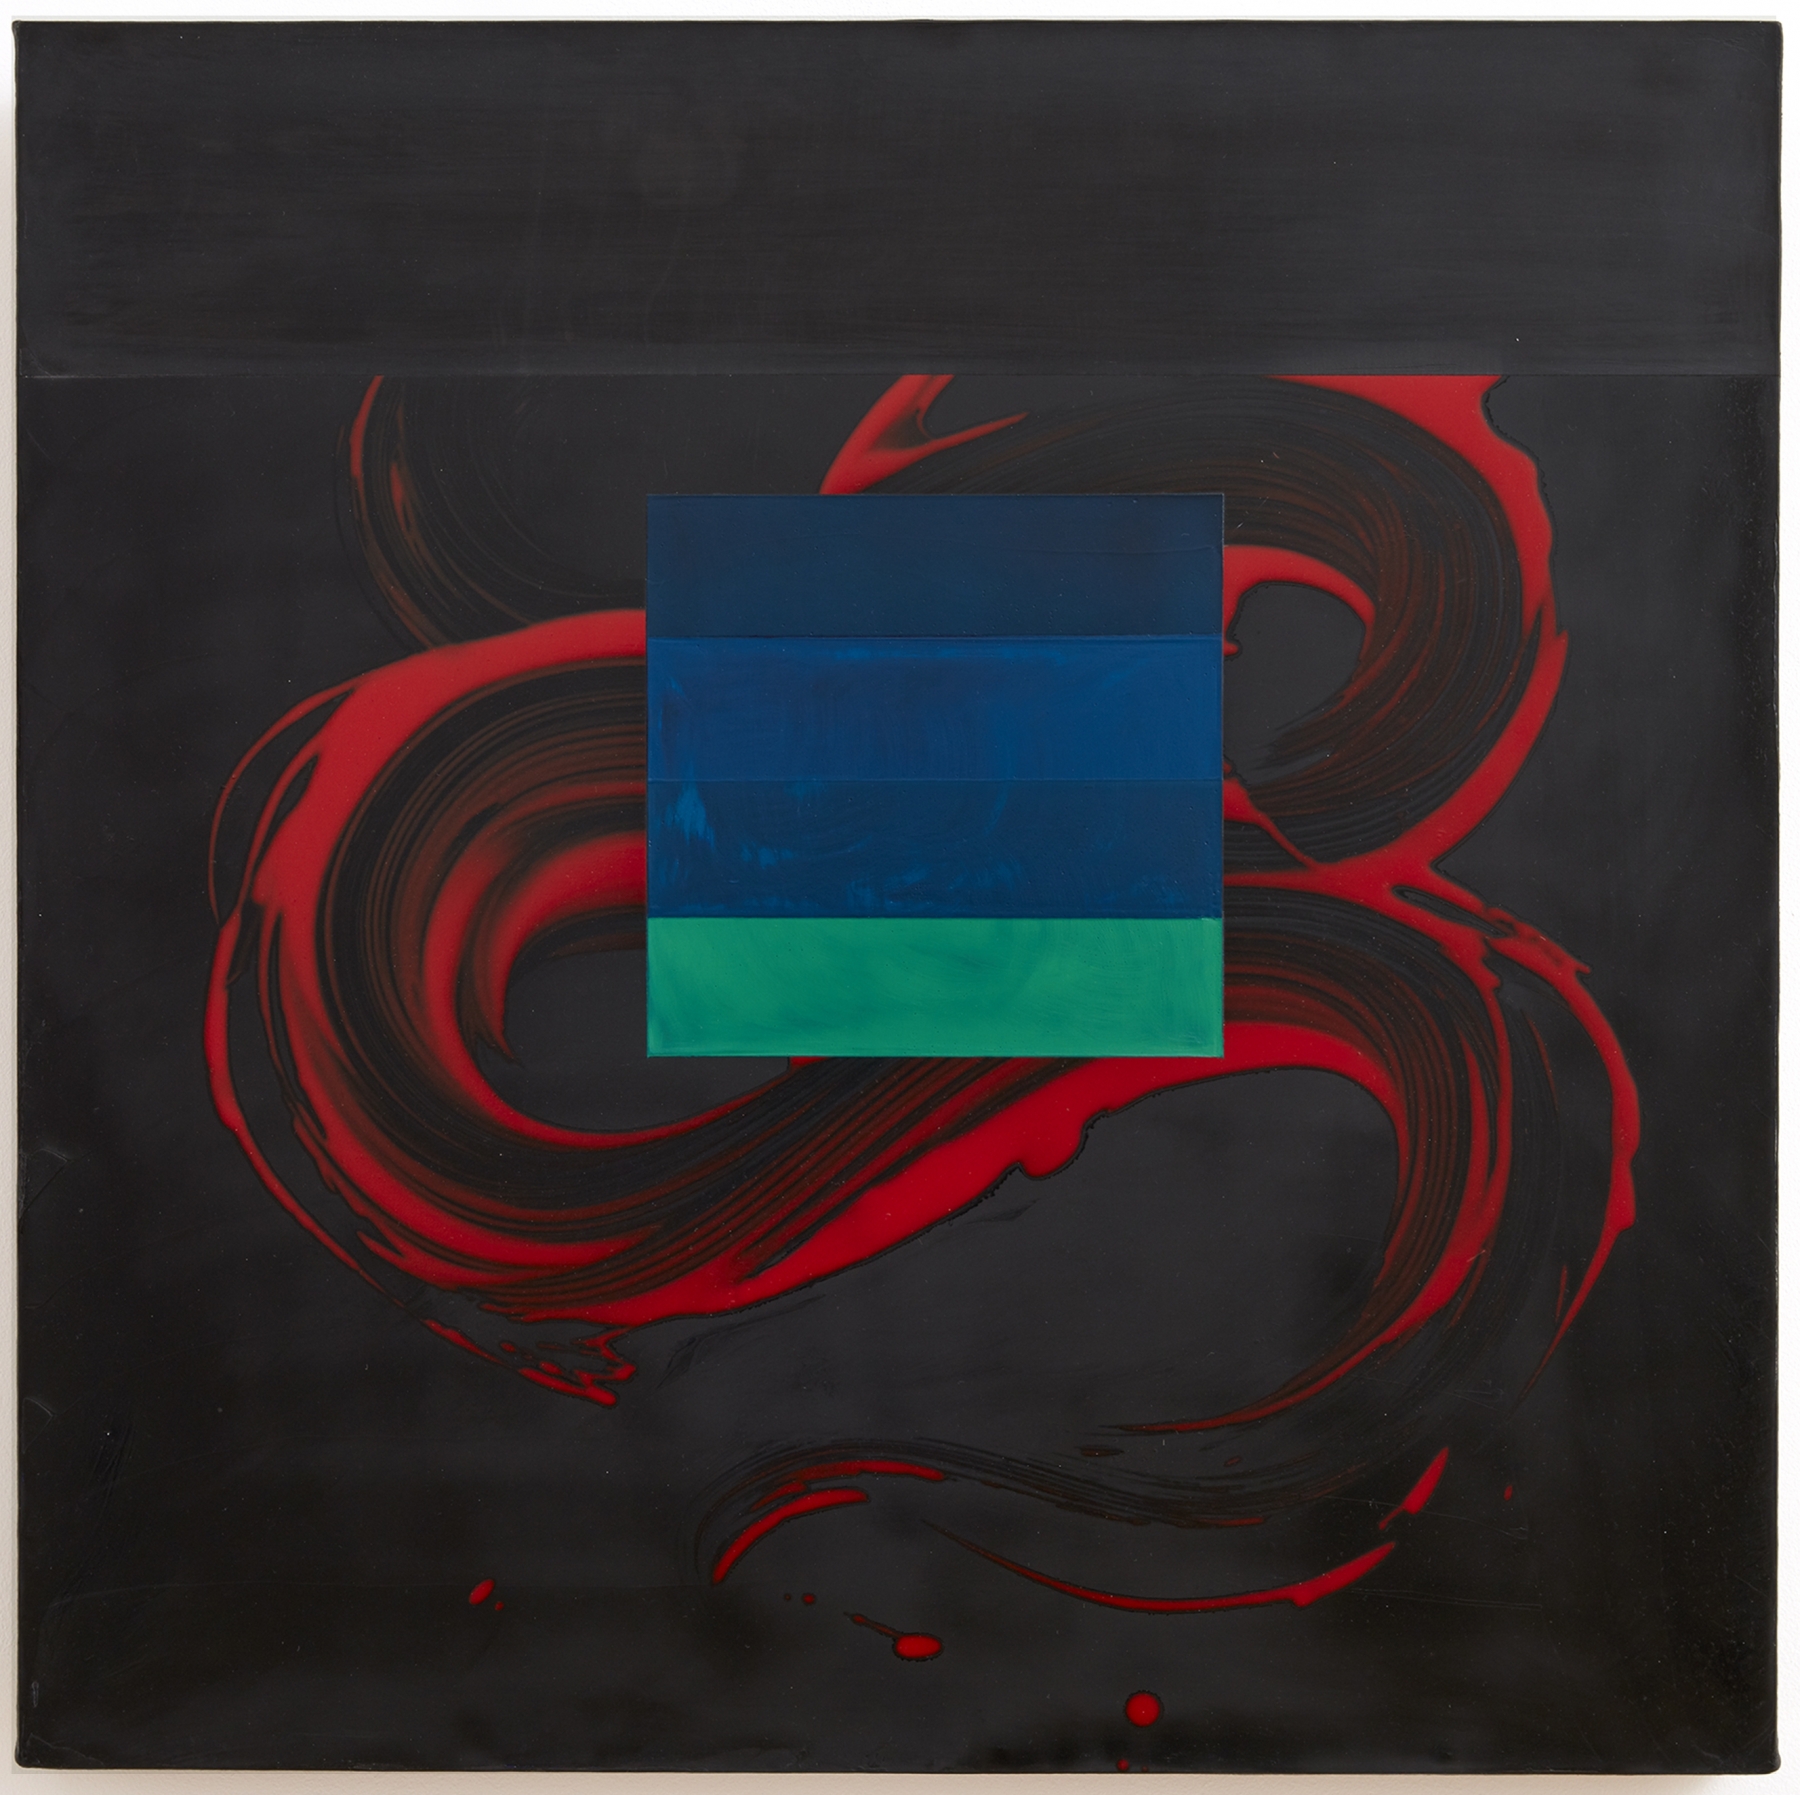 David Reed
#244, 1987
Oil and alkyd resin on canvas
24 1/8 x 24 1/4 inches (61 x 61.5 cm)

Inquire
&amp;nbsp;